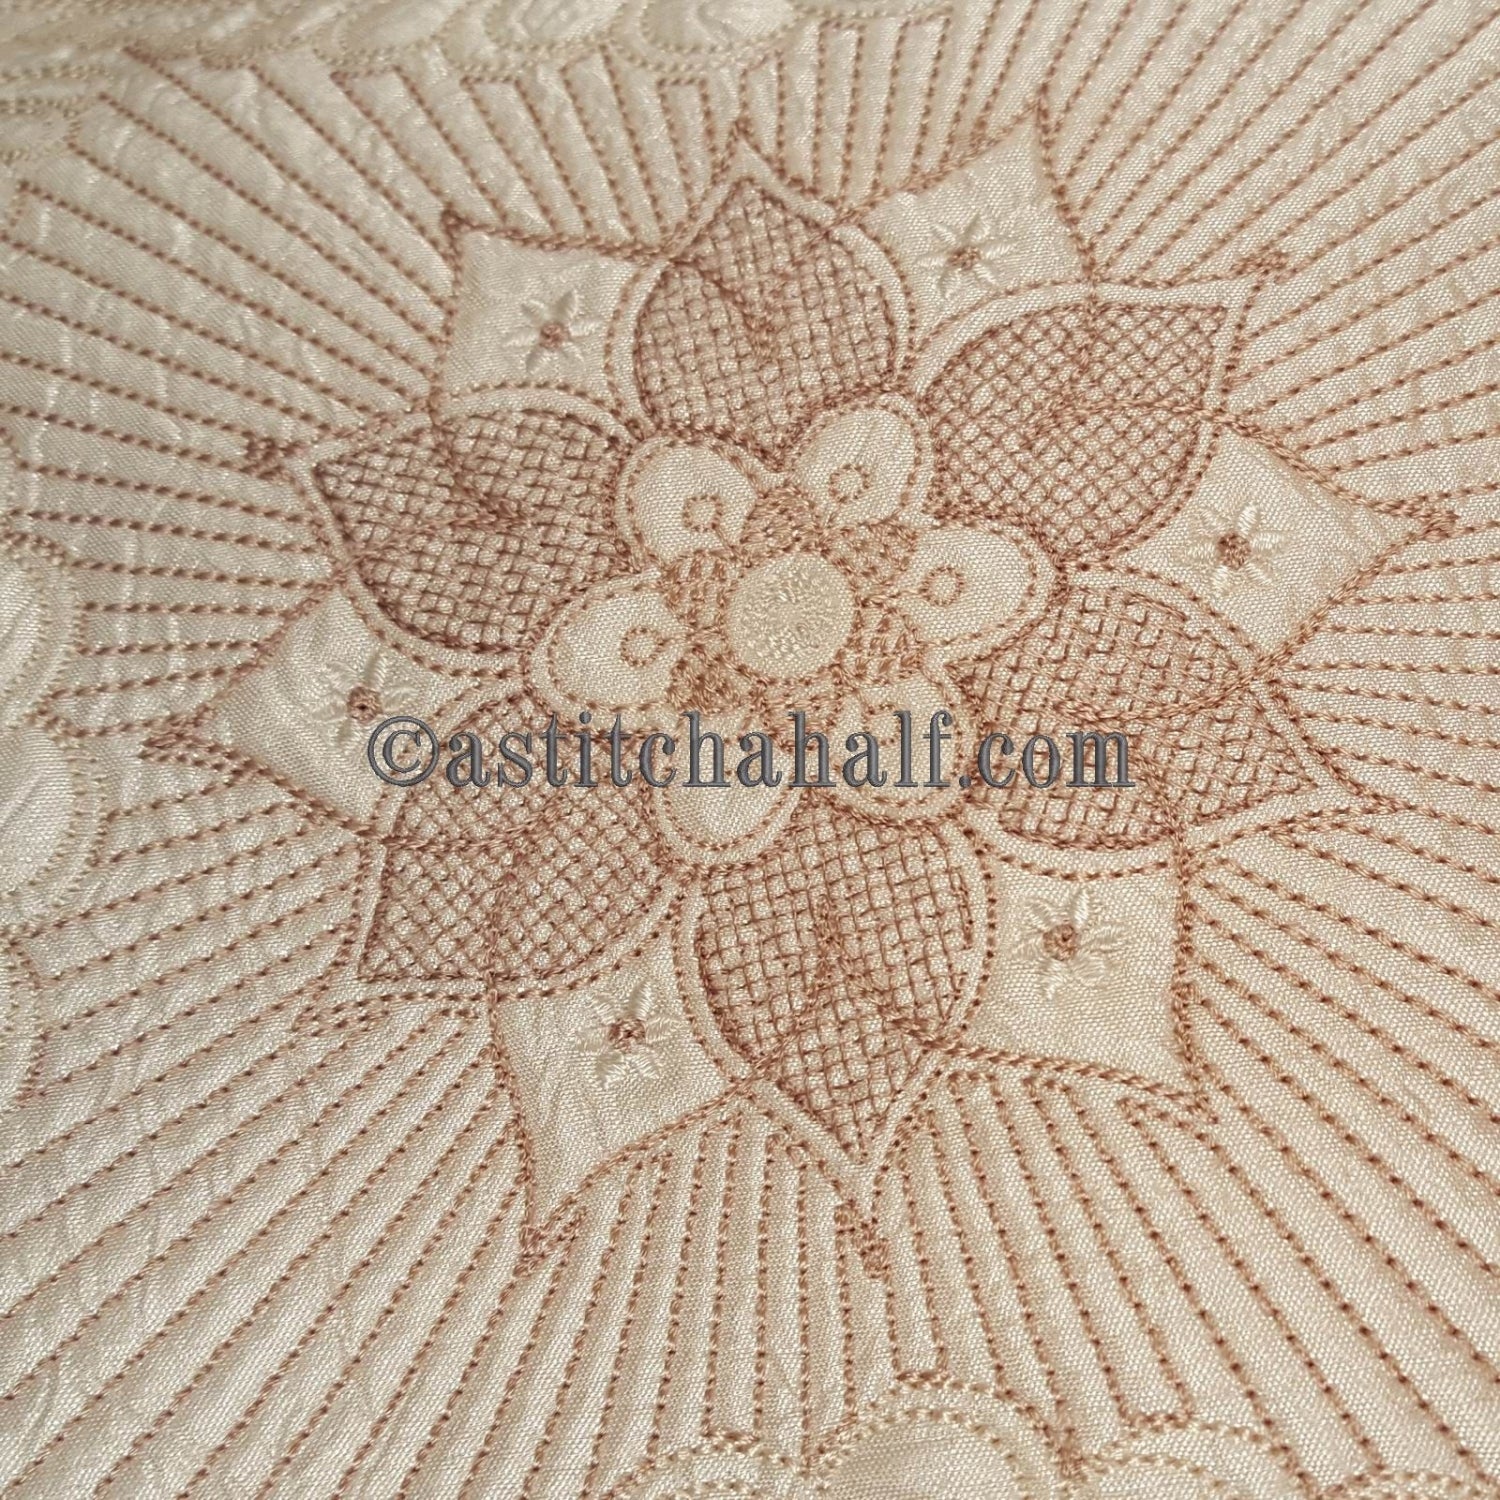 Feathers Latte Pillow Quilt Combo - aStitch aHalf